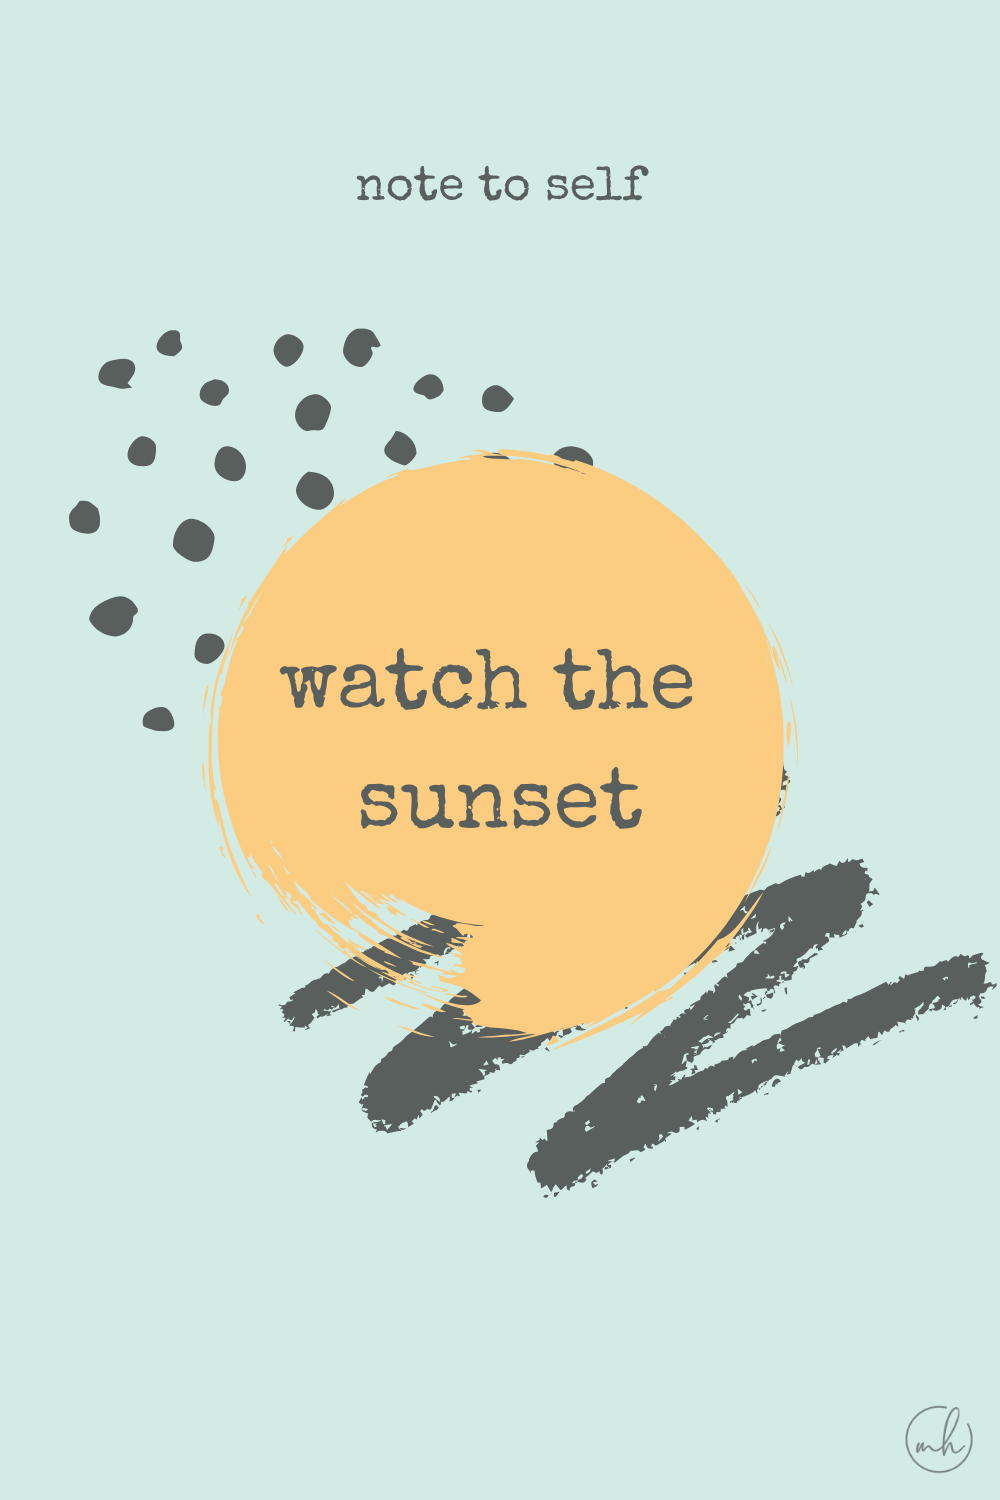 Watch the sunset - Note to self quotes | myhoogah